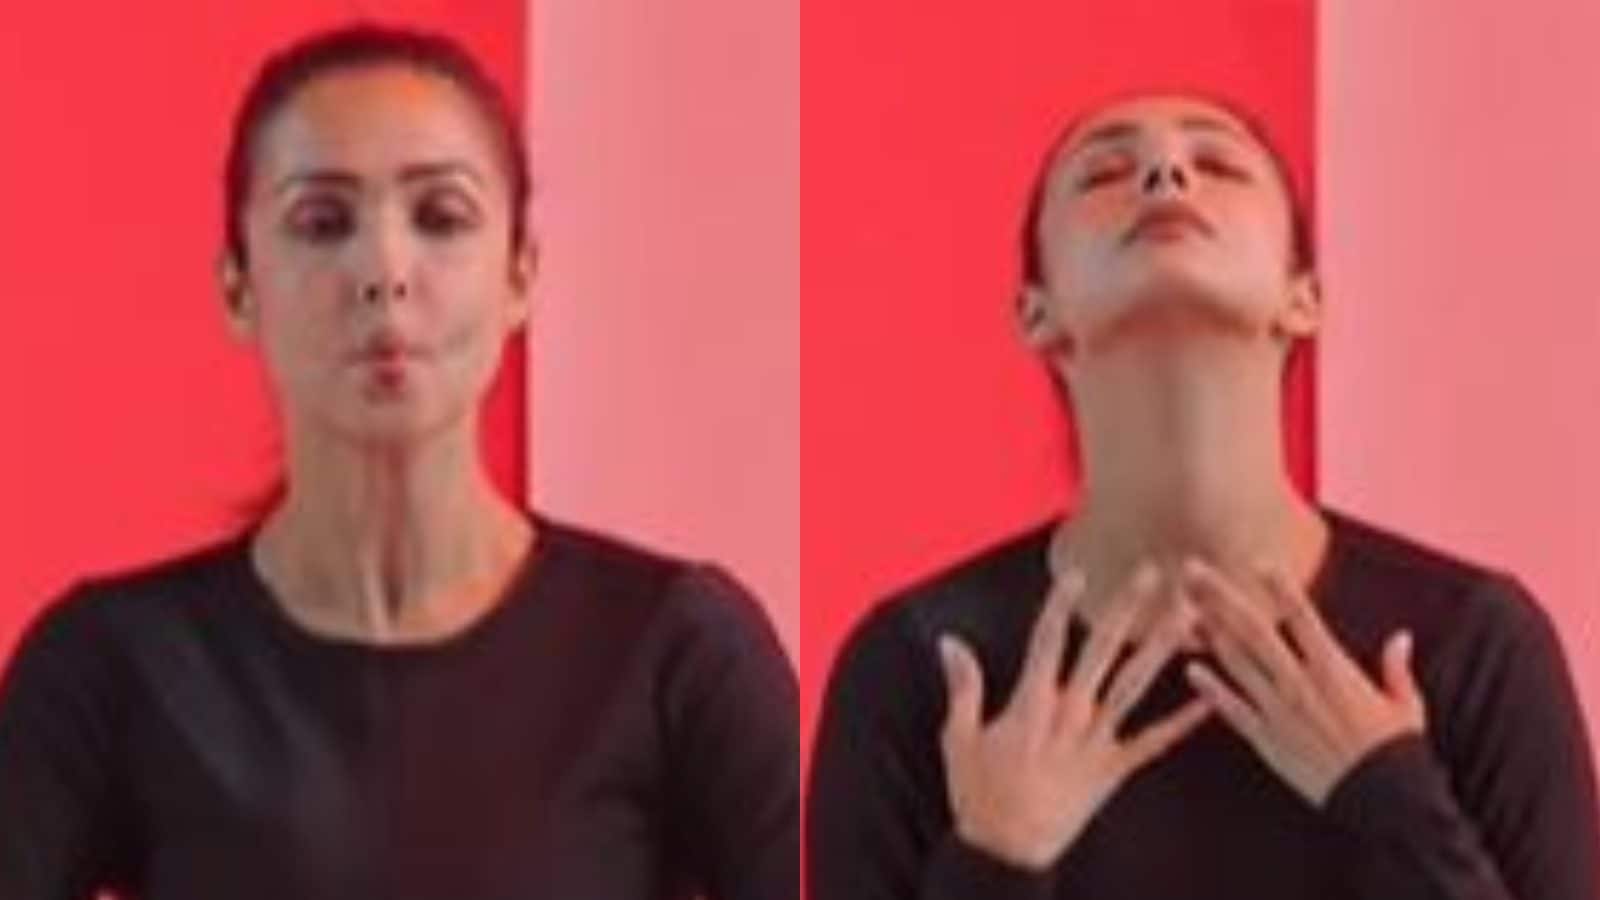 Malaika Arora Answers Burning Questions About Face Yoga in Style With Fun Video